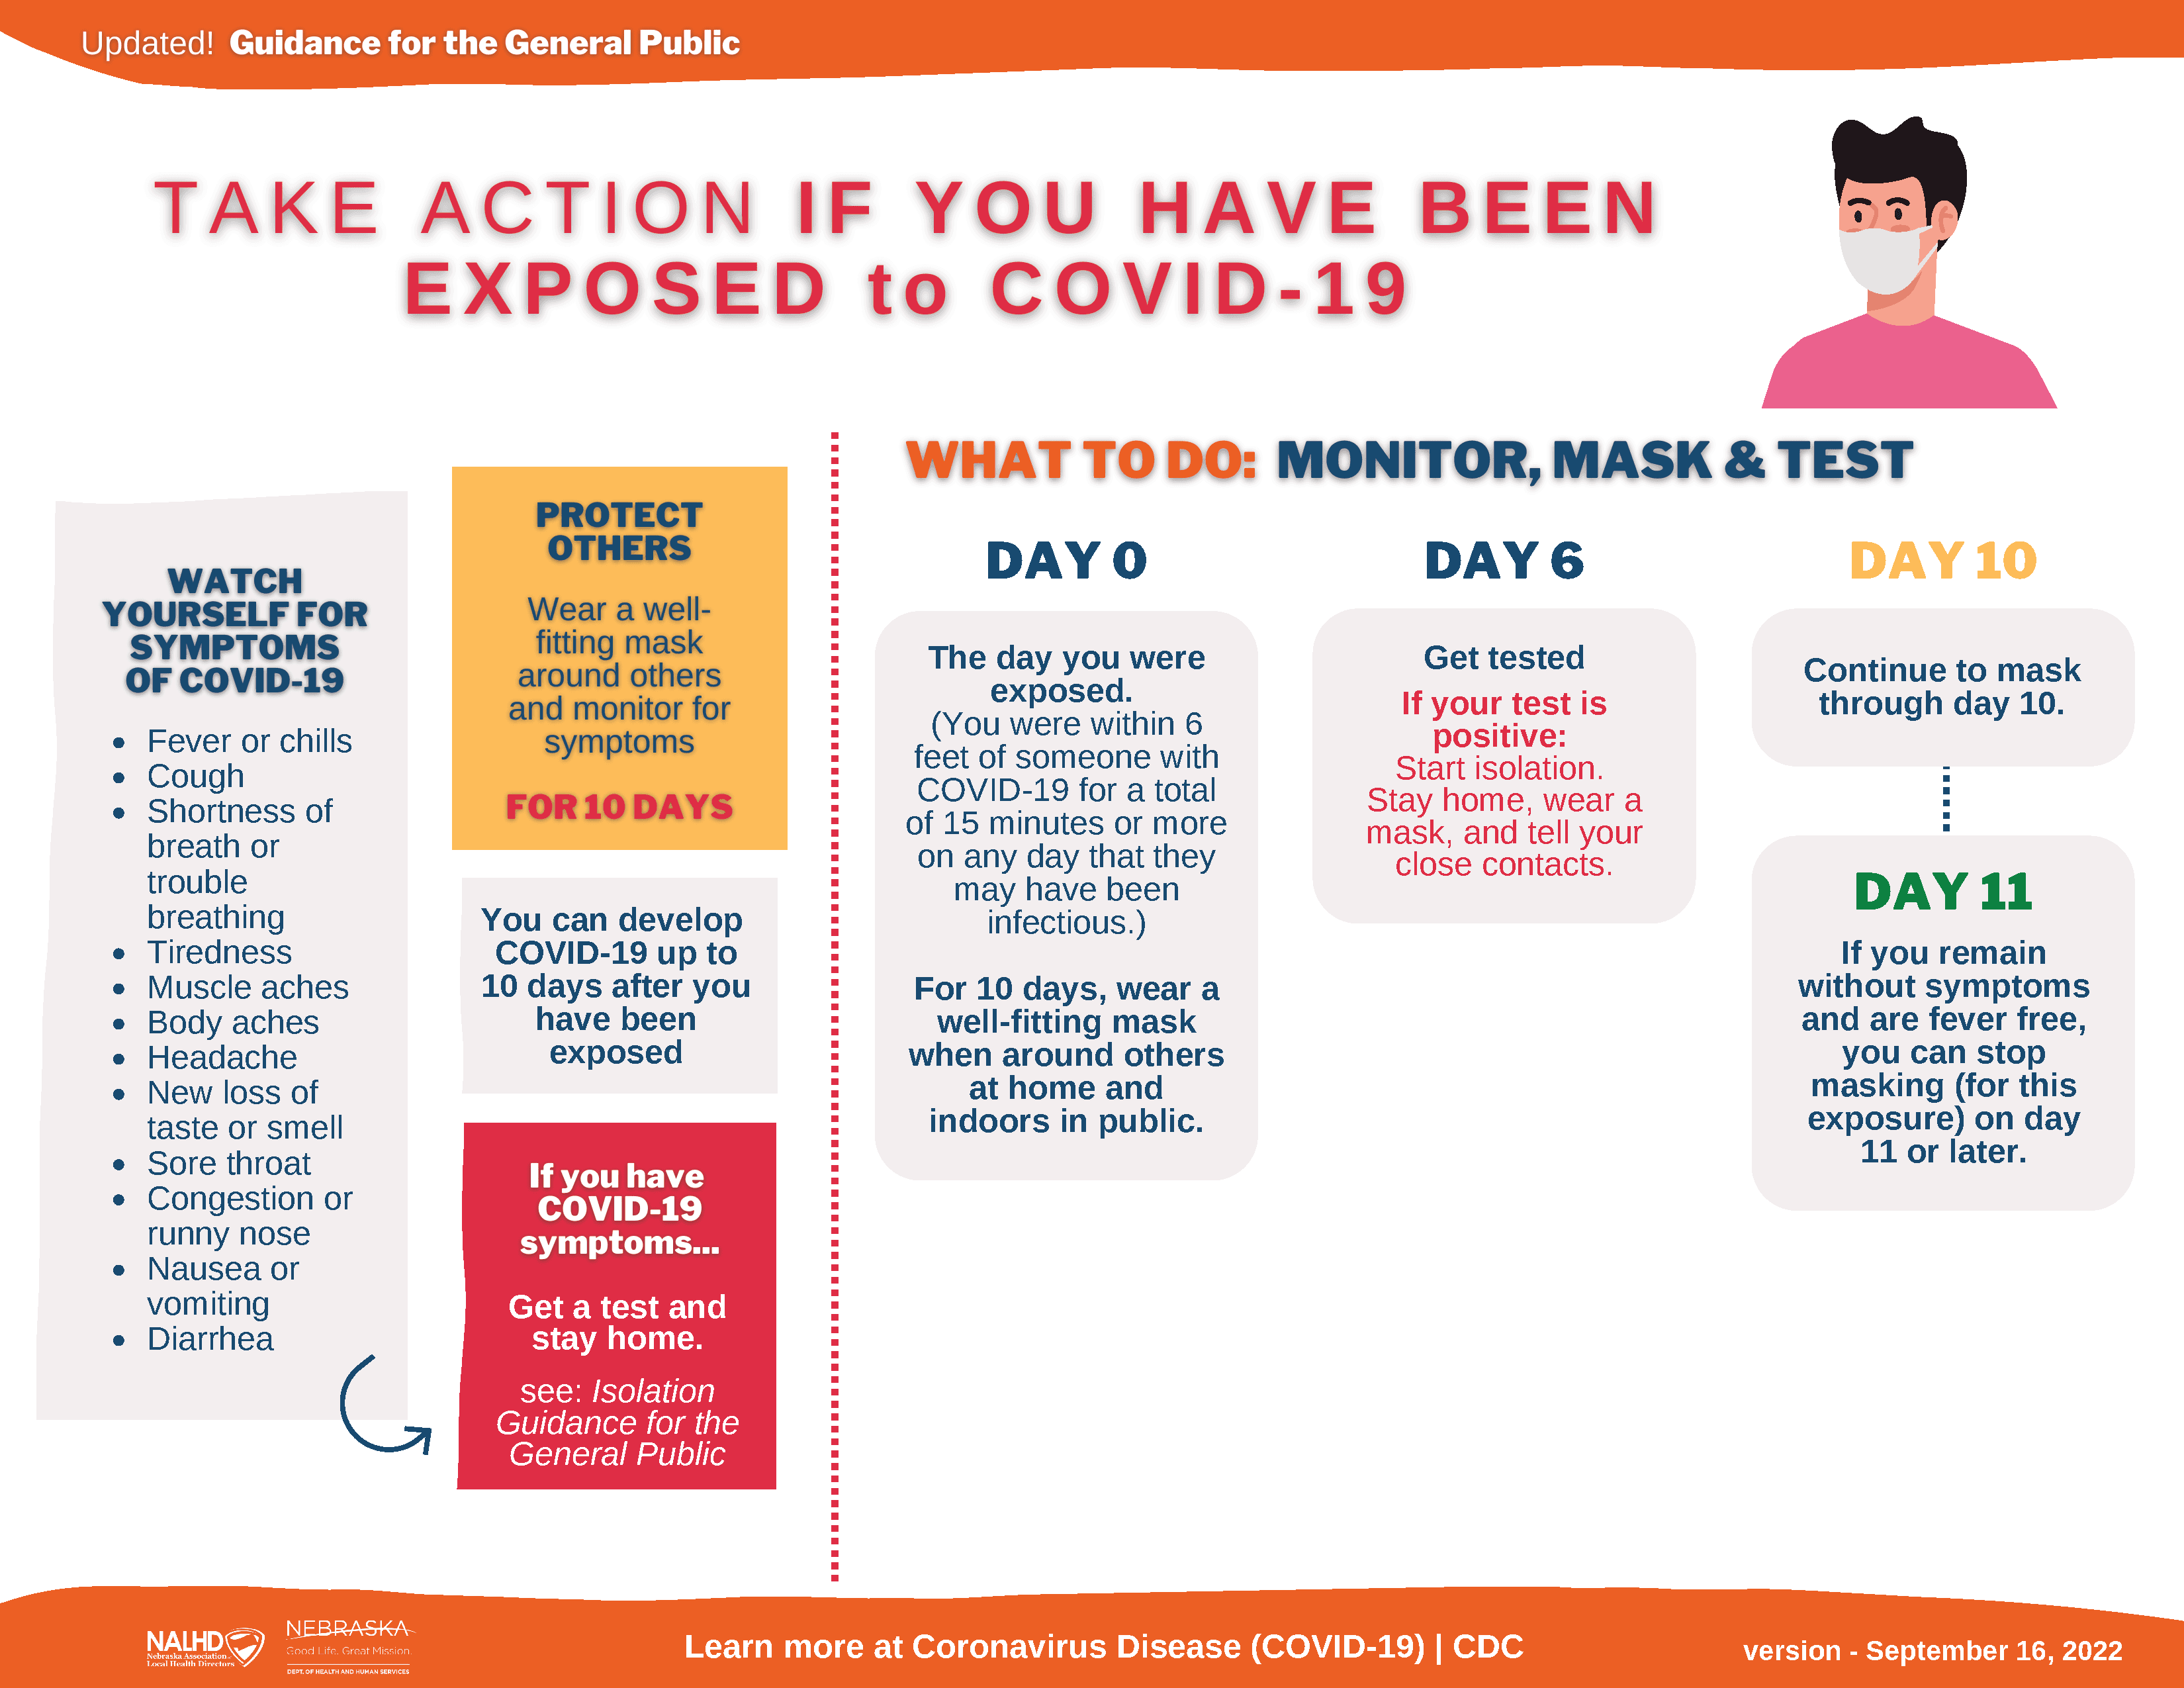 Take action if you're exposed to COVID-19